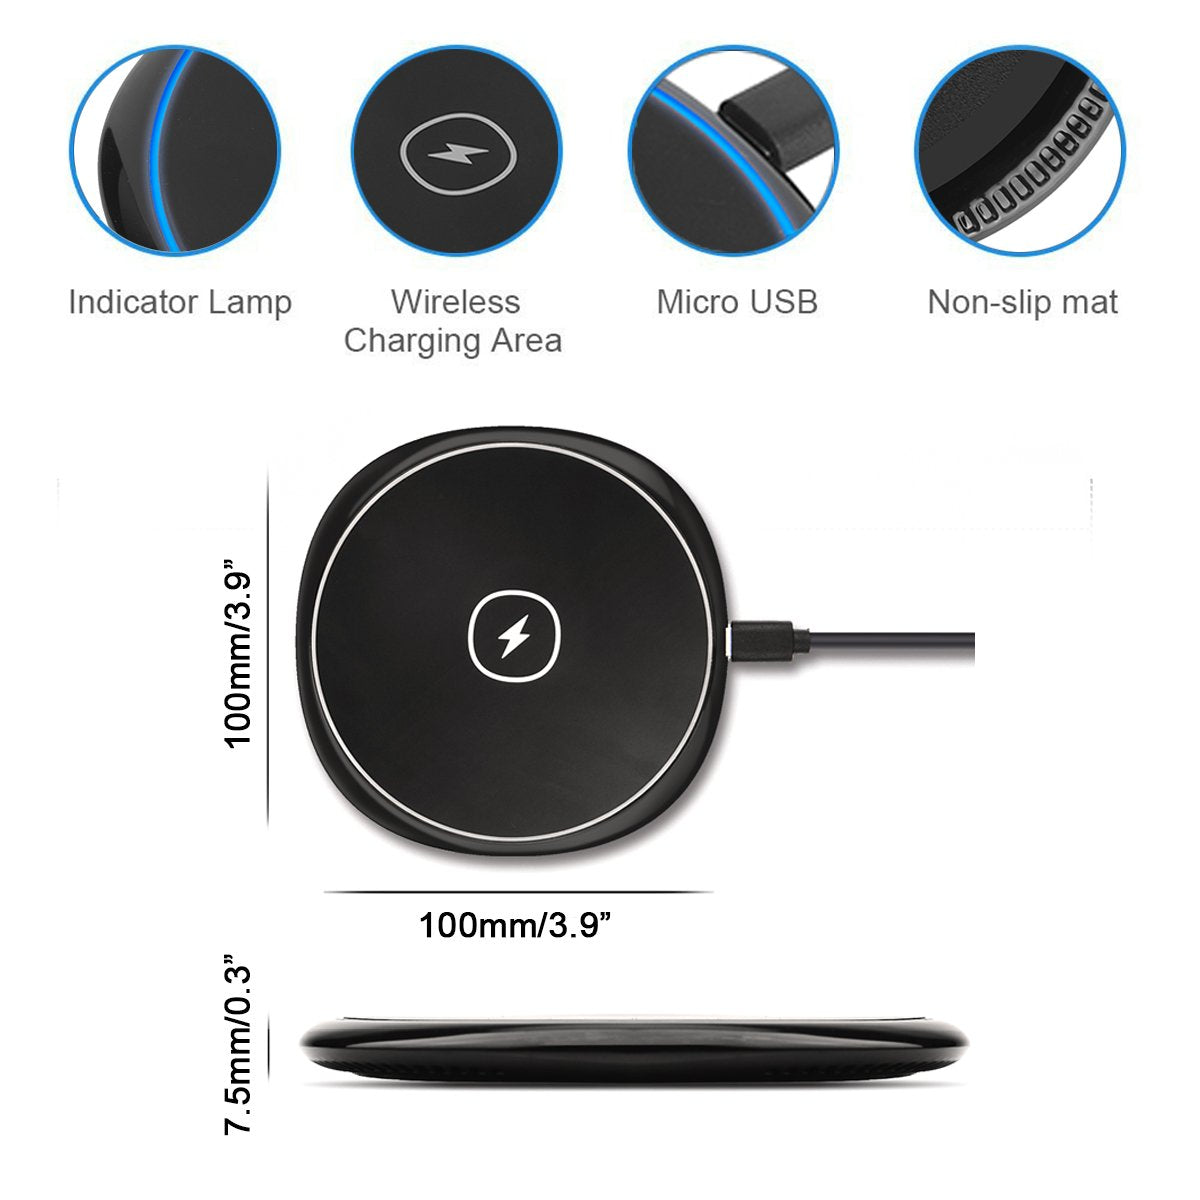 Wireless Charger, Slim Charging Pad 7.5W and 10W Fast - NWR86